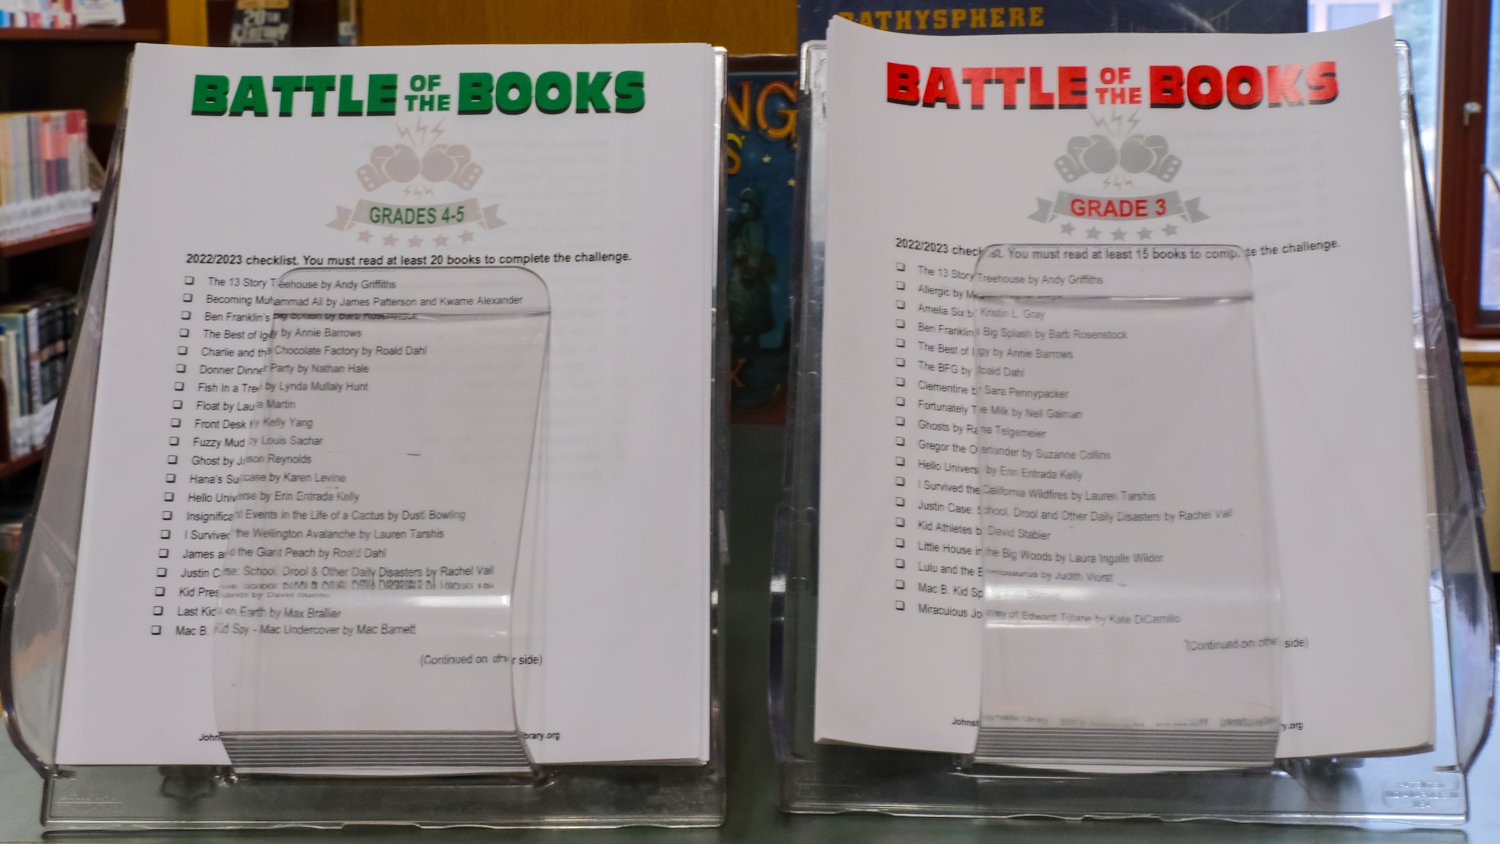 Battle of the Books reading challenge sheets.